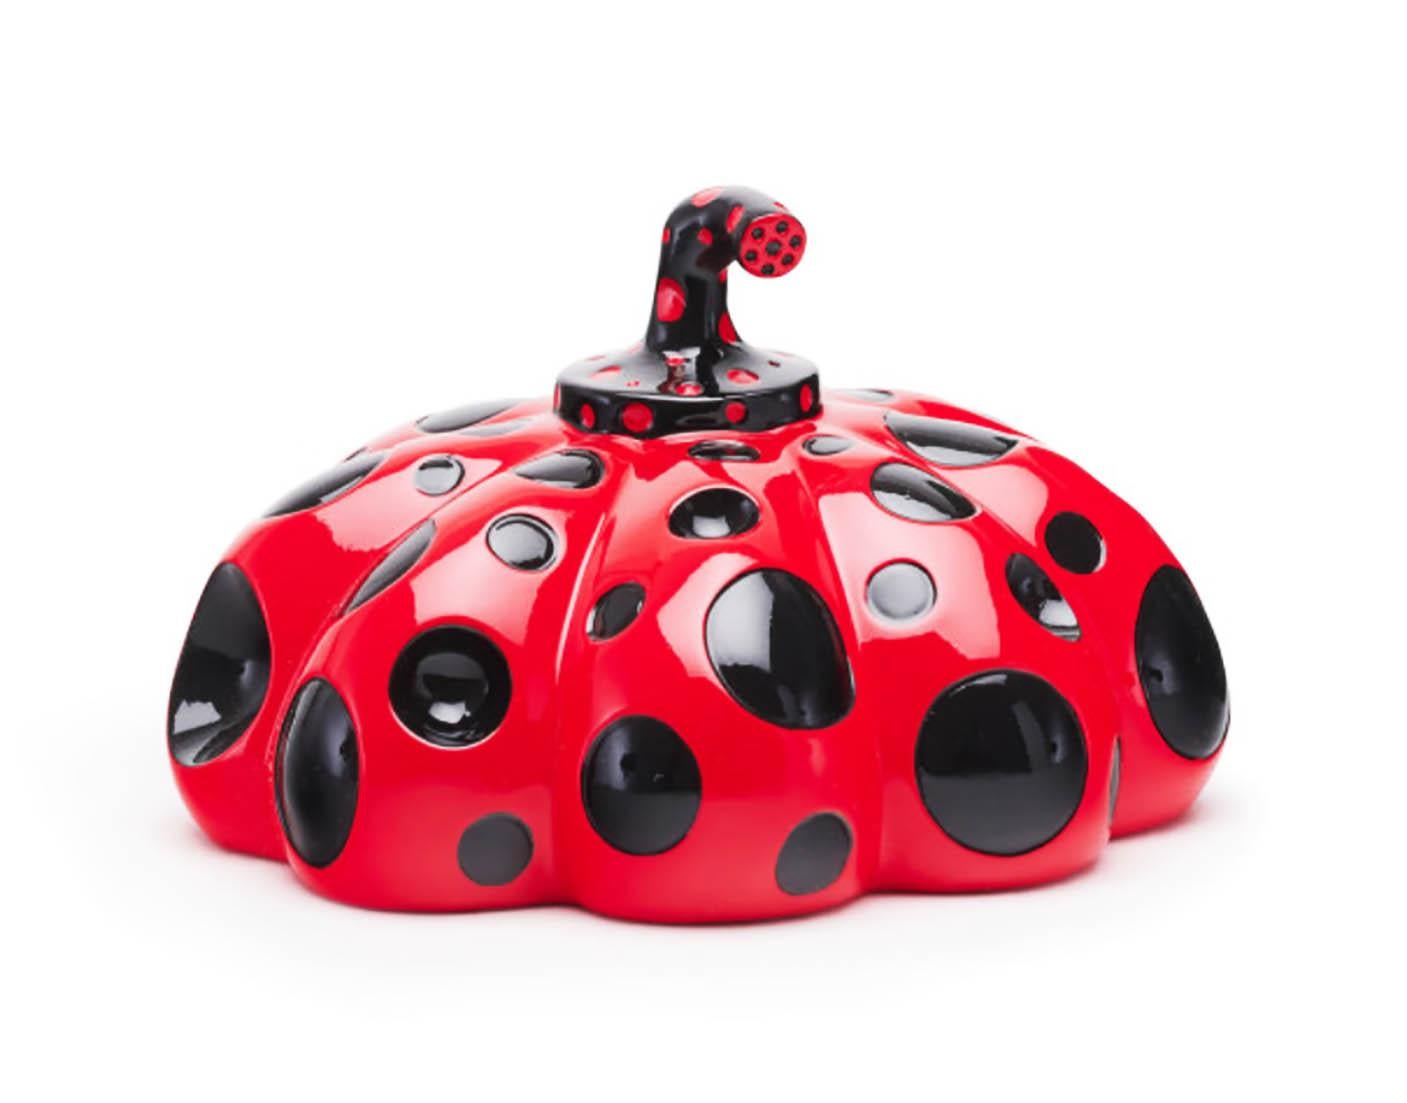 Yayoi Kusama Set of 3 Pumpkins: Yellow and Black, Red & White and Red & Black
Naoshima:

An iconic, vibrantly colored pop art set - these small Kusama pumpkin sculptures feature the universal polka dot patterns and bold colors for which the artist